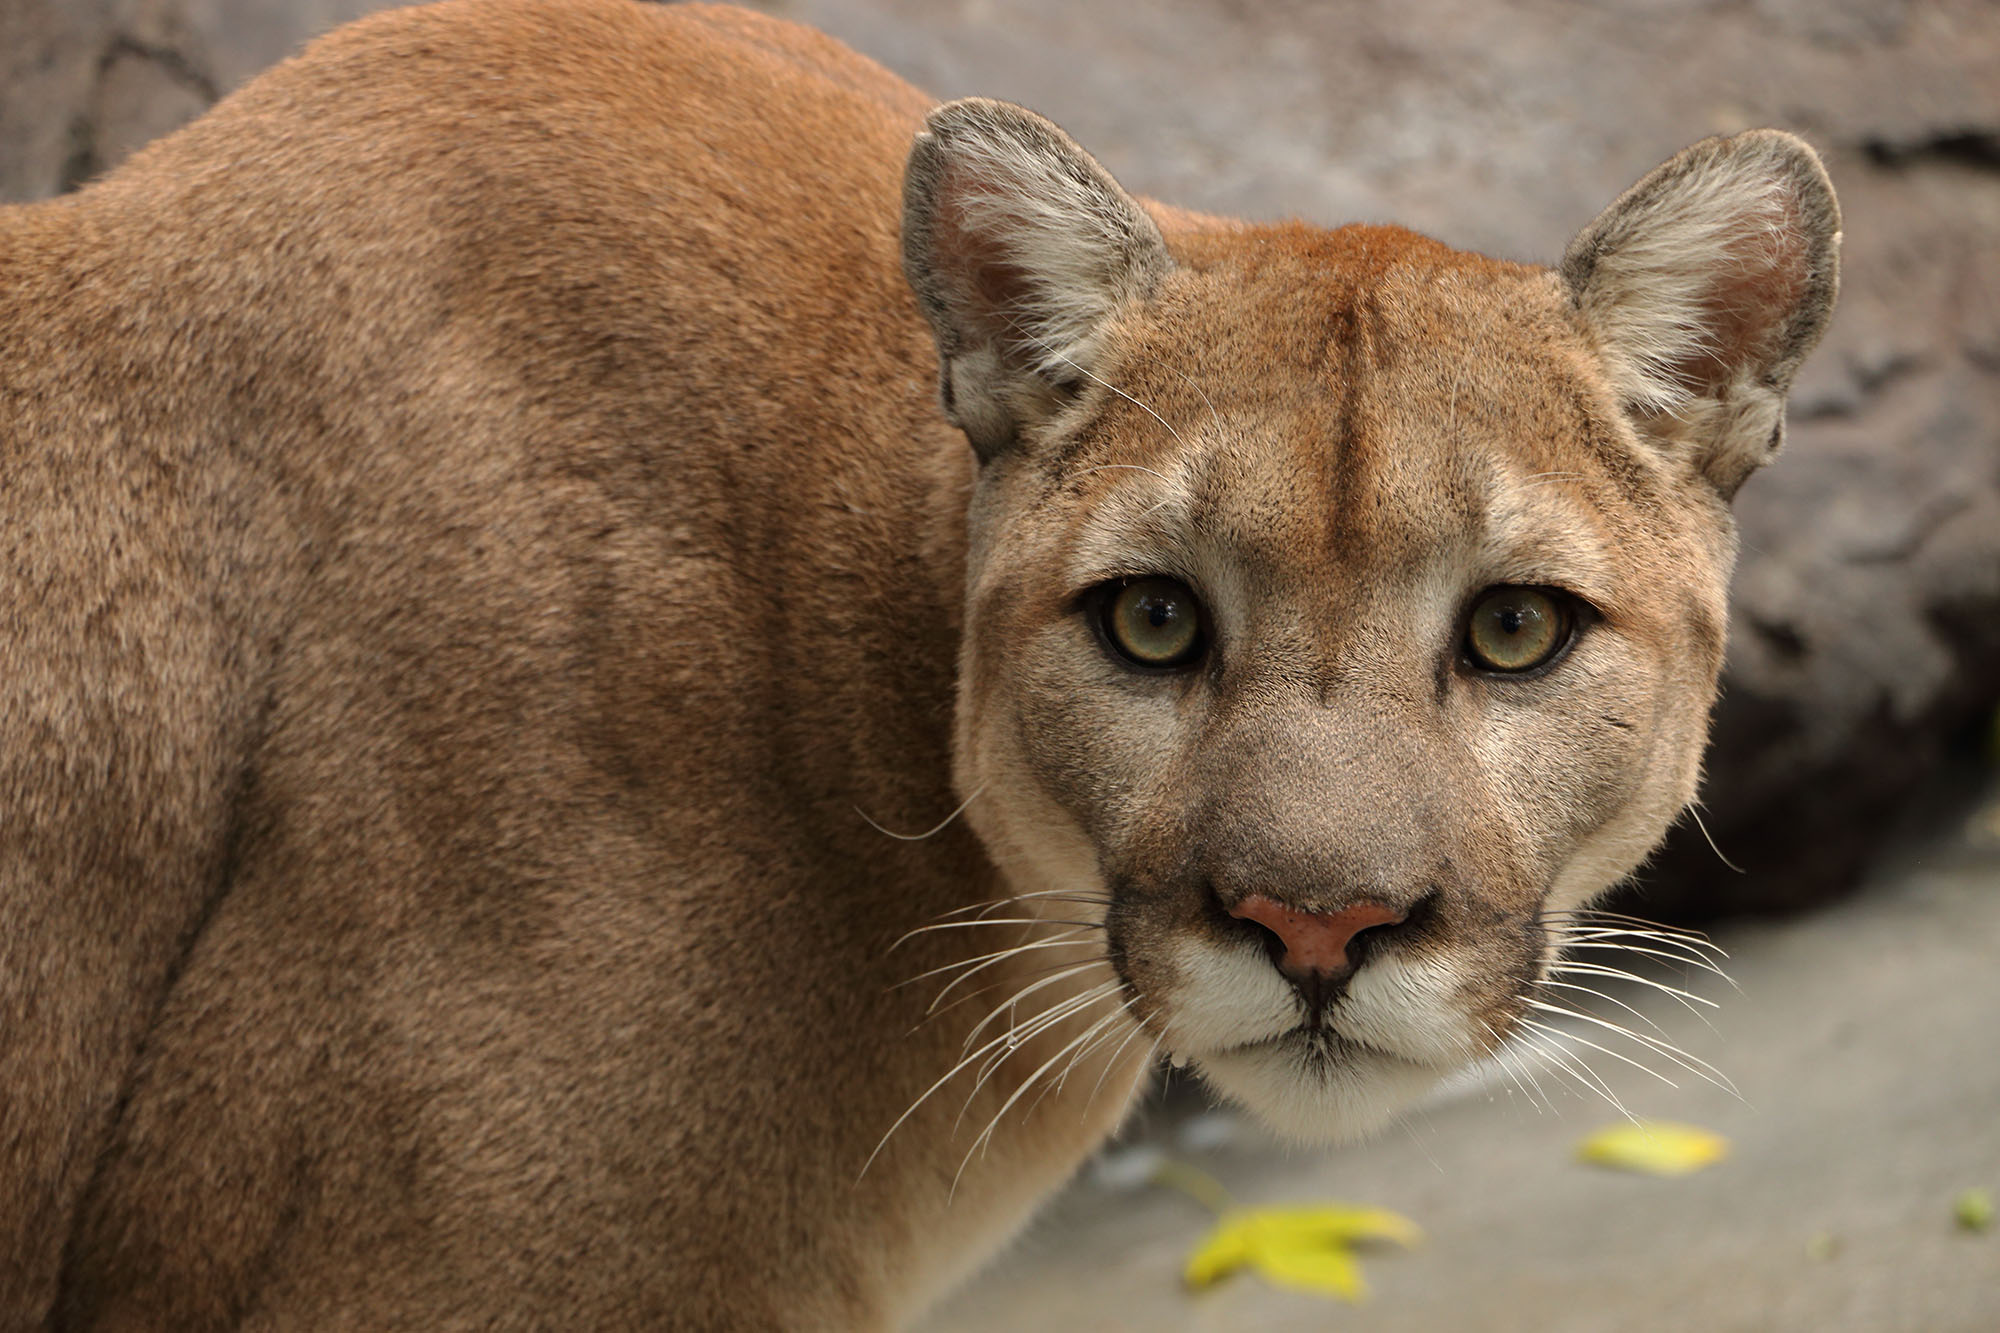 how long do cougars live in the wild